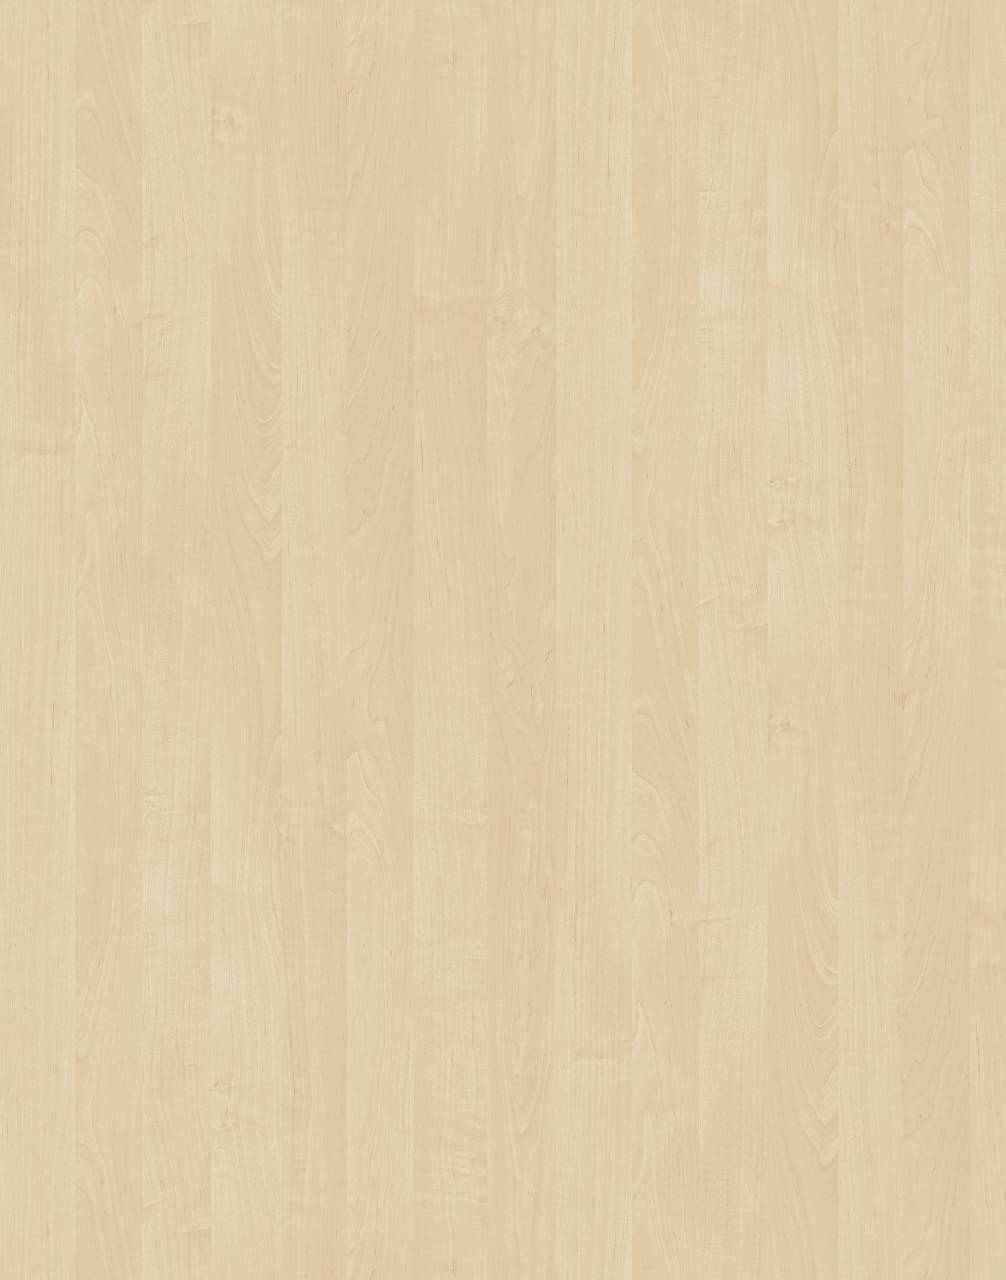 Birch BS HPL with textured surface, light tones, and a subtle sheen for a natural and delicate look.